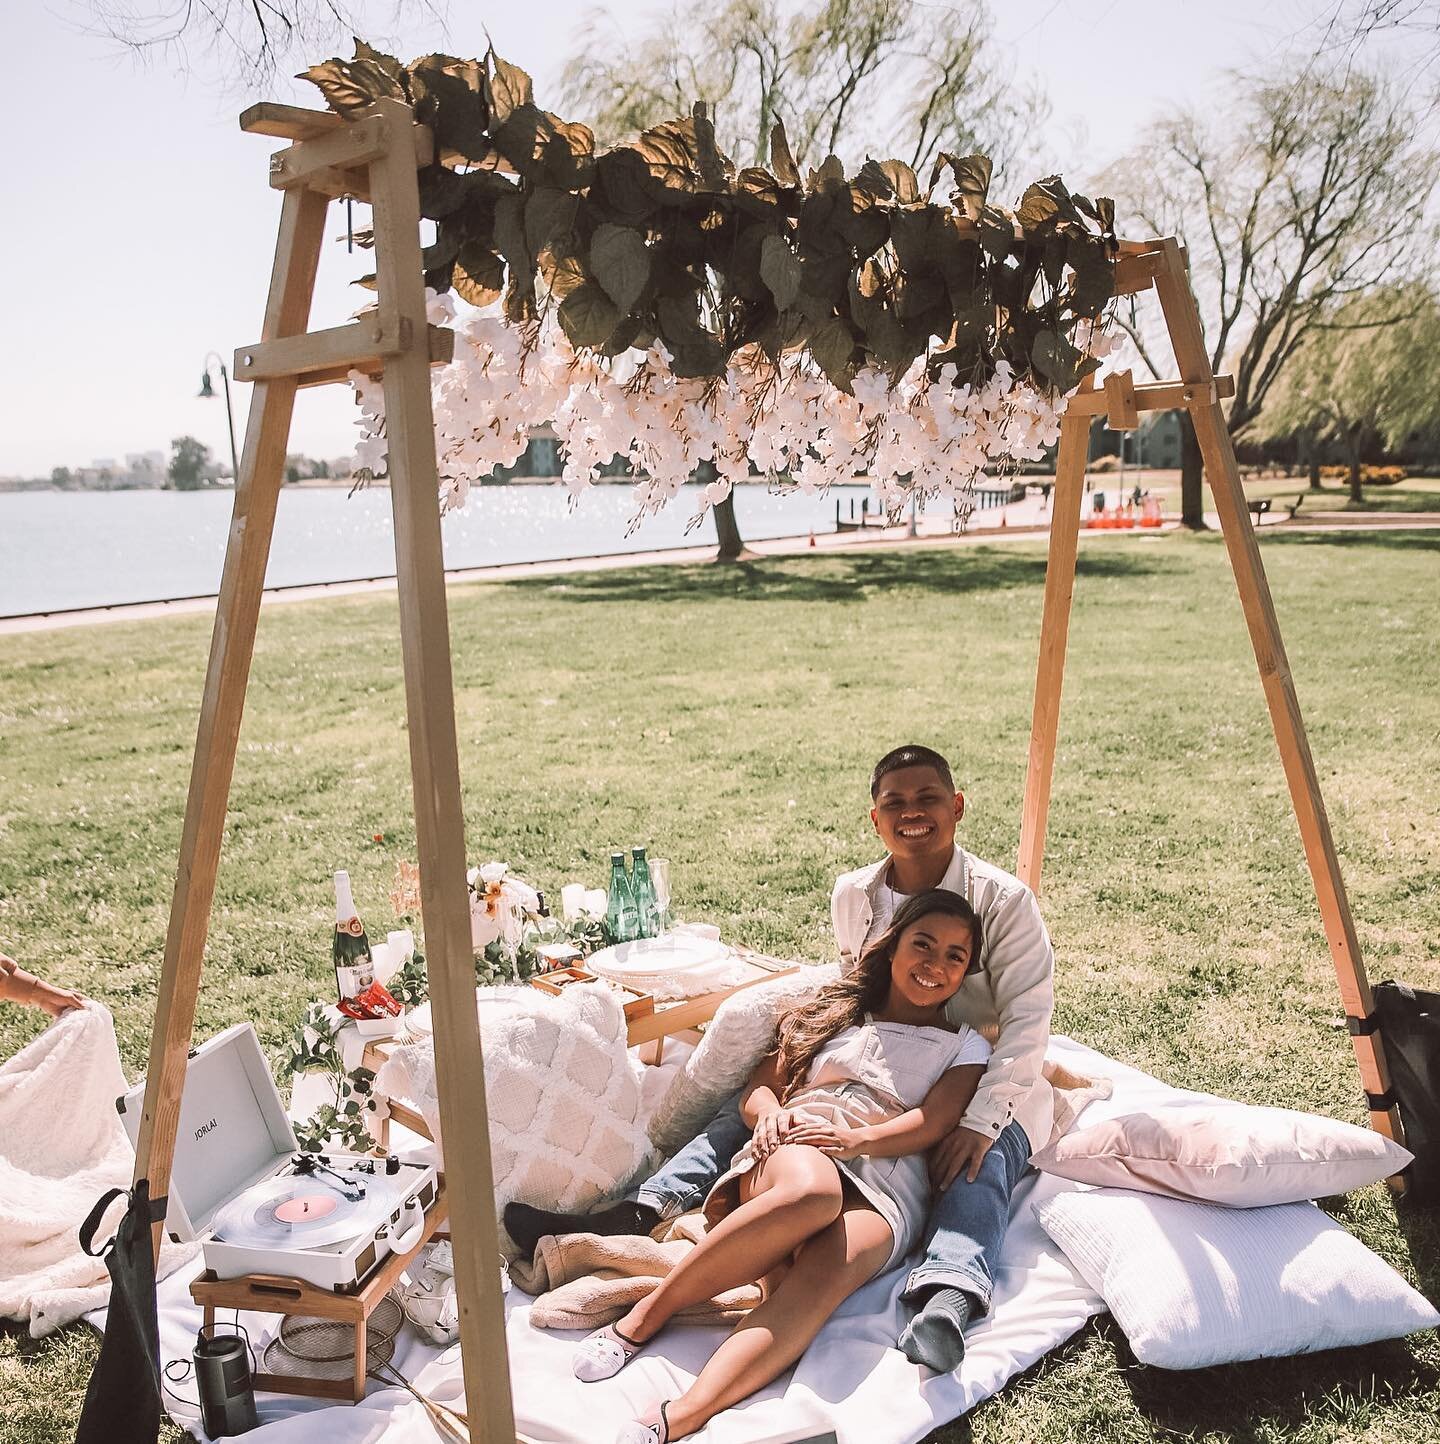 All i want for my birthday is a luxury picnic 😍✨

Happy birthday Nerissa! Thanks for celebrating with us 🧺

#picnic #sfpicnic #luxurypicnic #bayareaevents #eventplanner #eventdesign #events #thingstodointhebayarea #anniversaryideas #birthdaypartyid